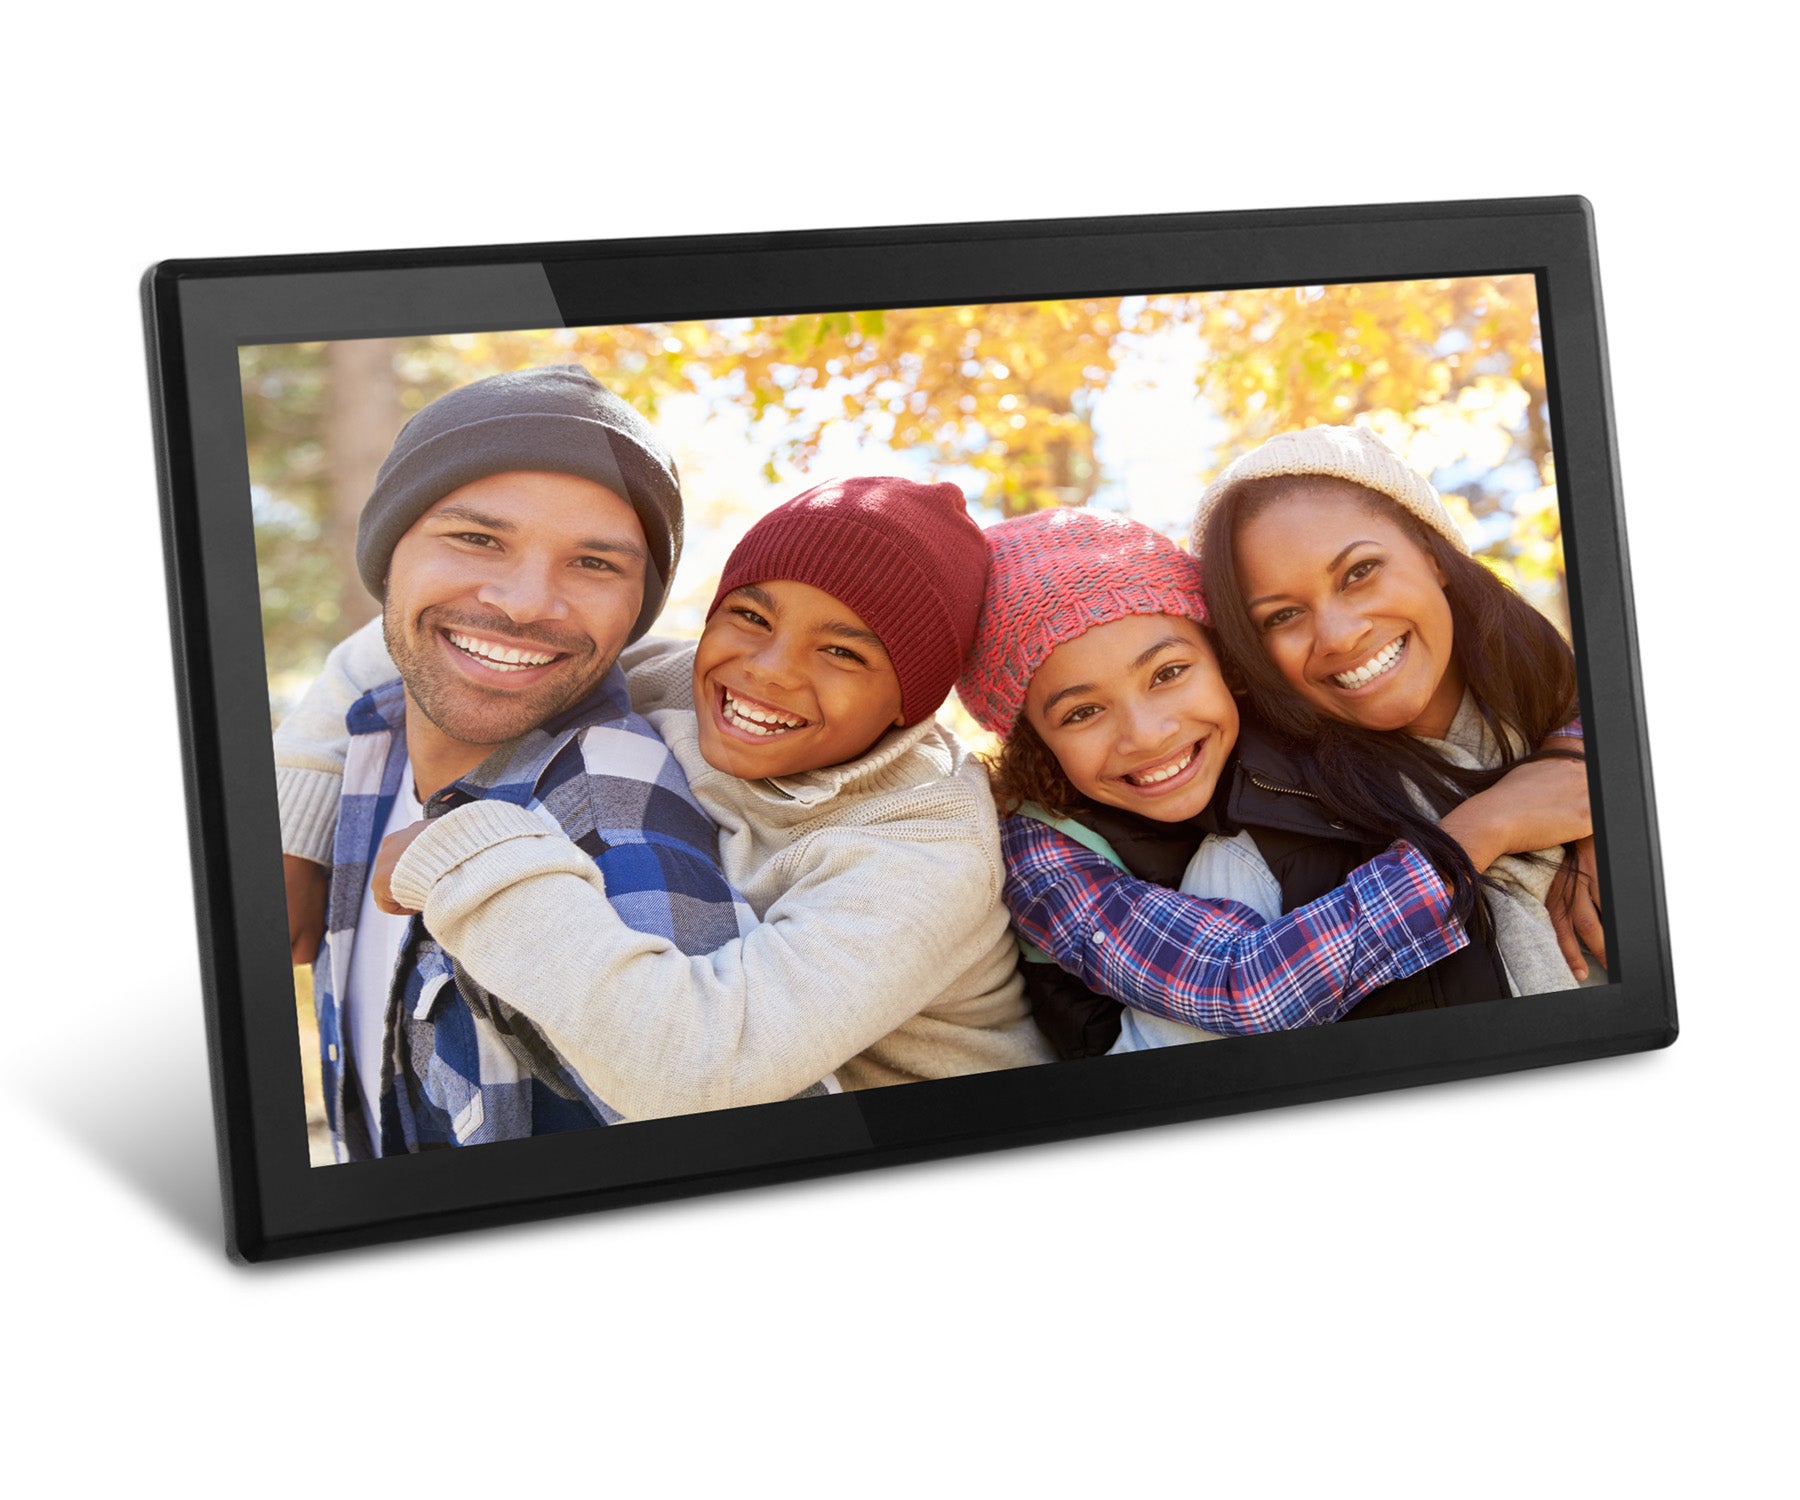 WiFi Digital Photo Frame with Touchscreen IPS LCD Display and 16GB Bui